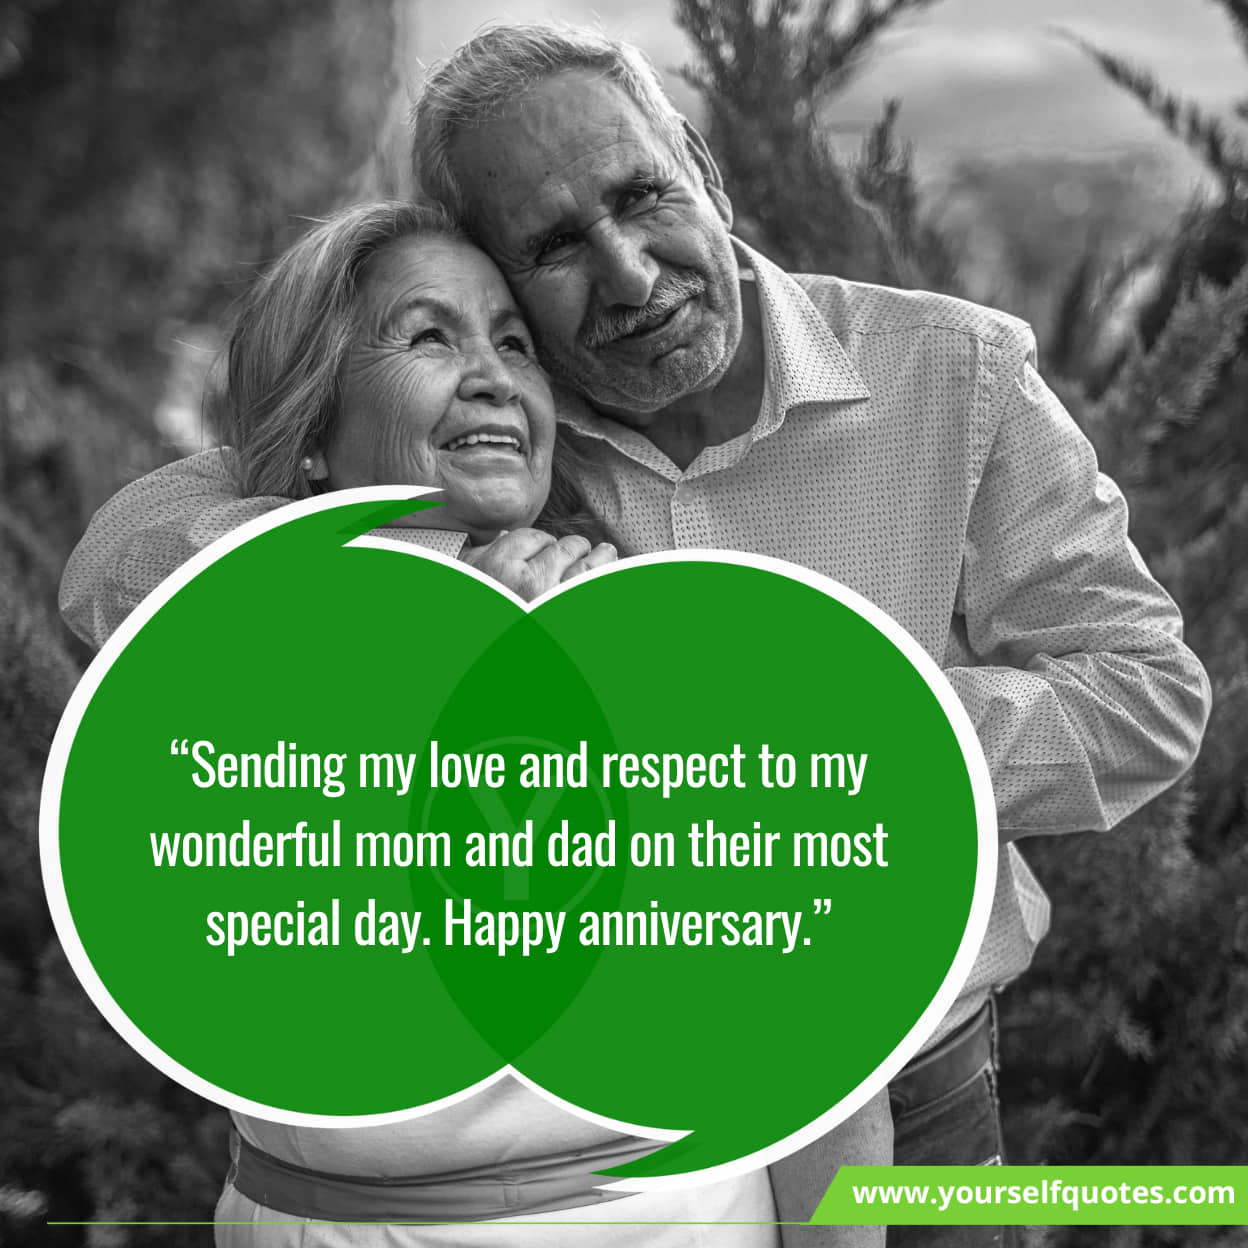 Happy Anniversary Wishes for My Parents Who Are Still Young at Heart